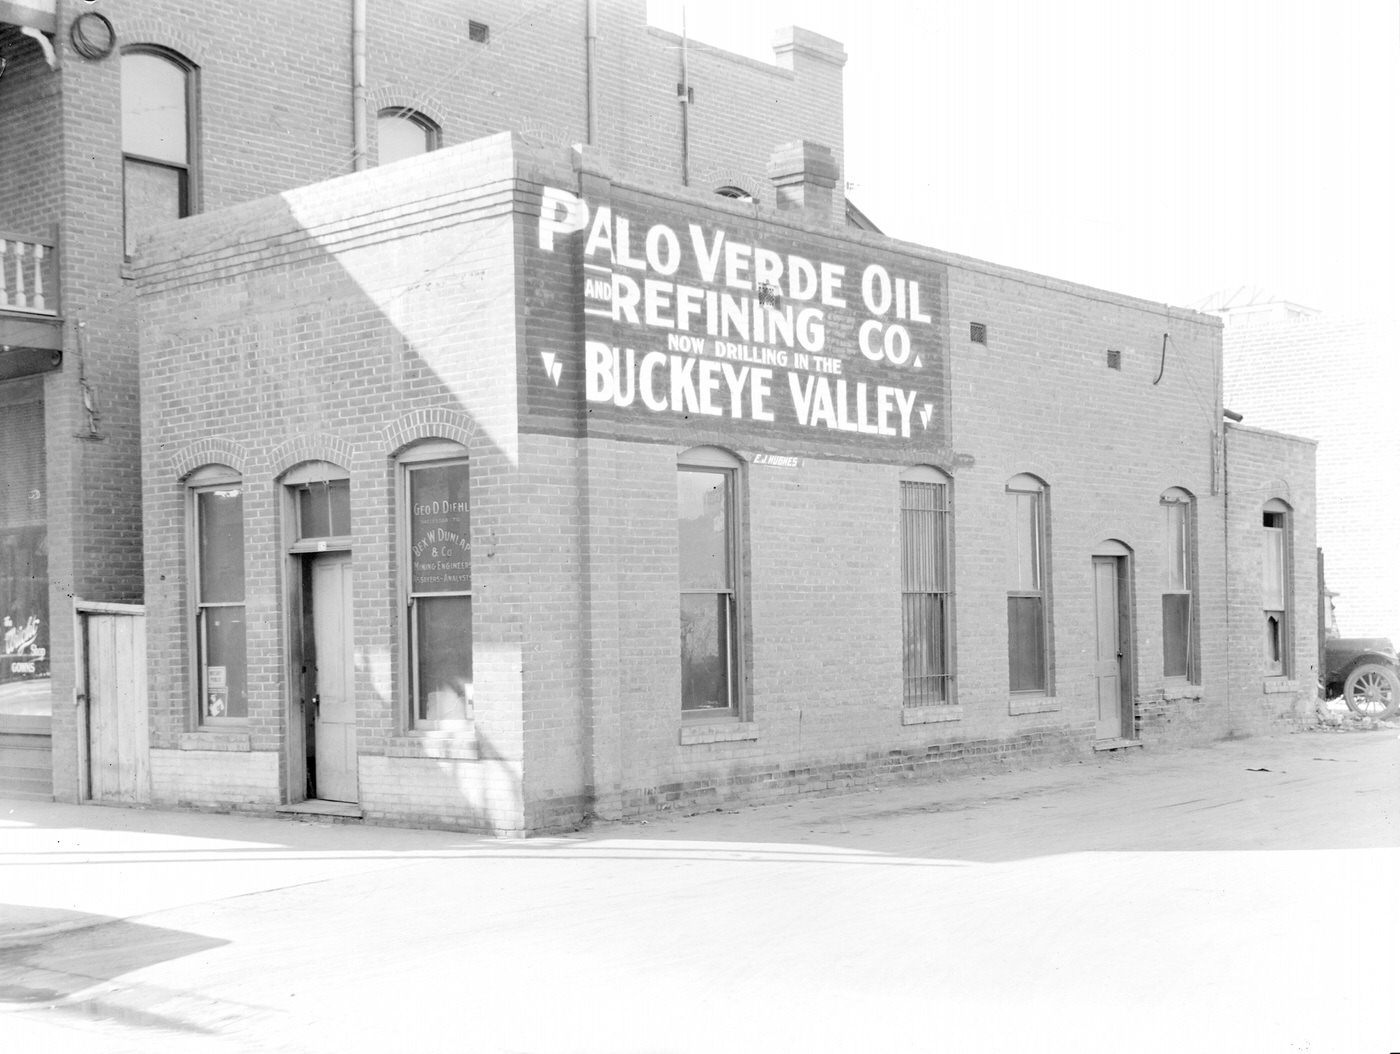 George D. Diehl Building, 1930s. Sign on the building reads "Palo Verde Oil and Refining Co. Now Drilling in the 'Buckeye Valley.'" This building was located at 18 N. 2nd Ave. in Phoenix.